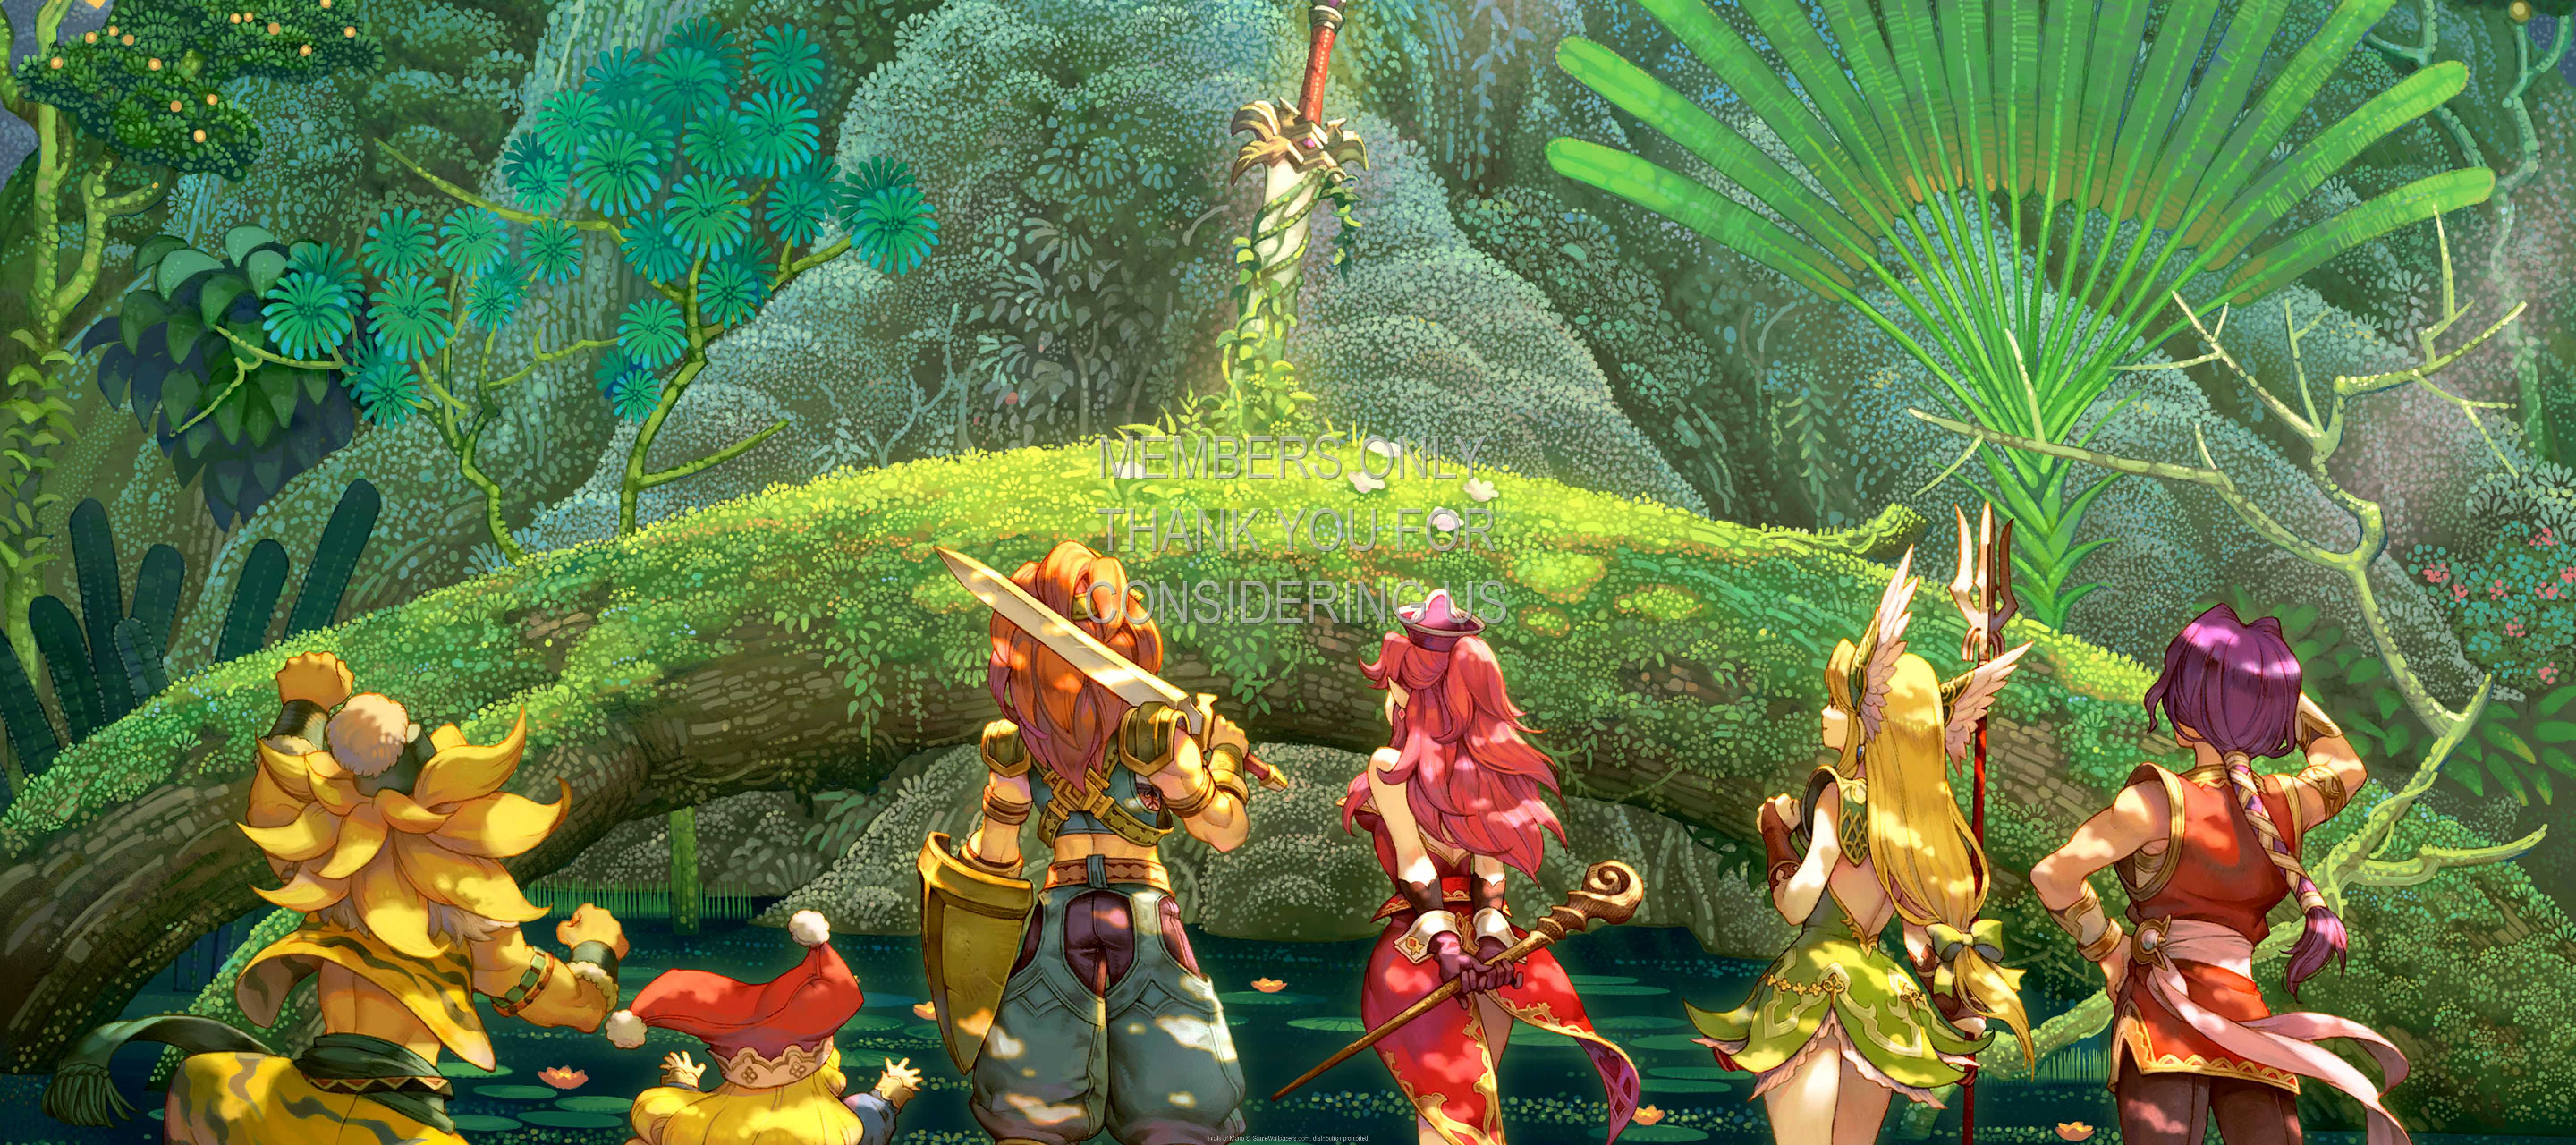 Trials of Mana 1440p%20Horizontal Mobile wallpaper or background 01